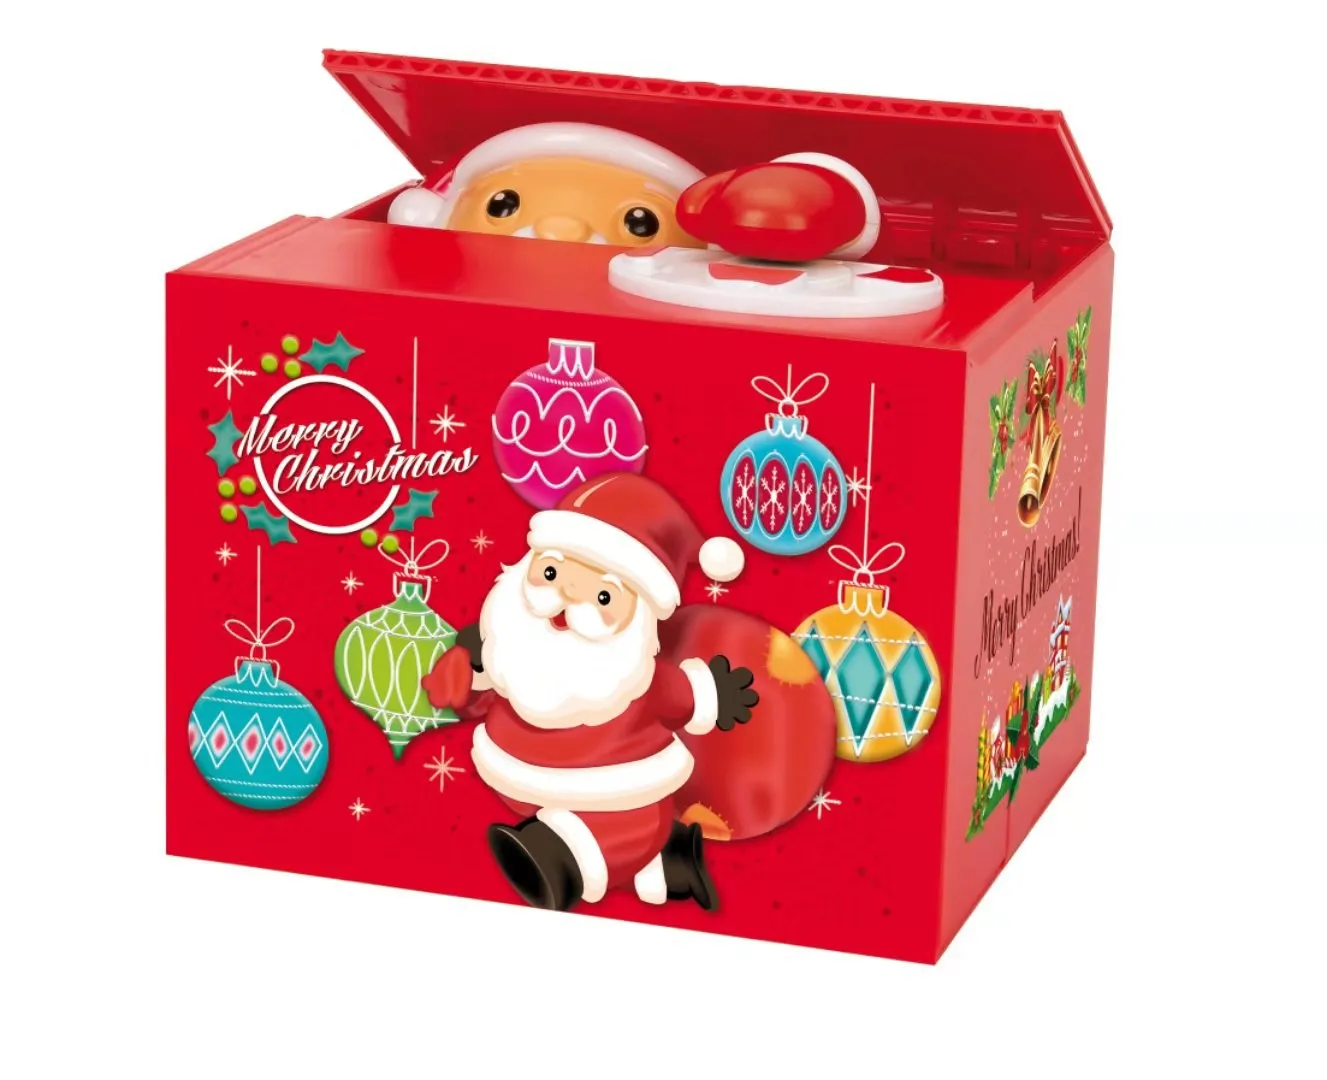 Peradix Stealing Coin Santa Claus Box Piggy Bank English Speaking Christmas Song for All Kids 